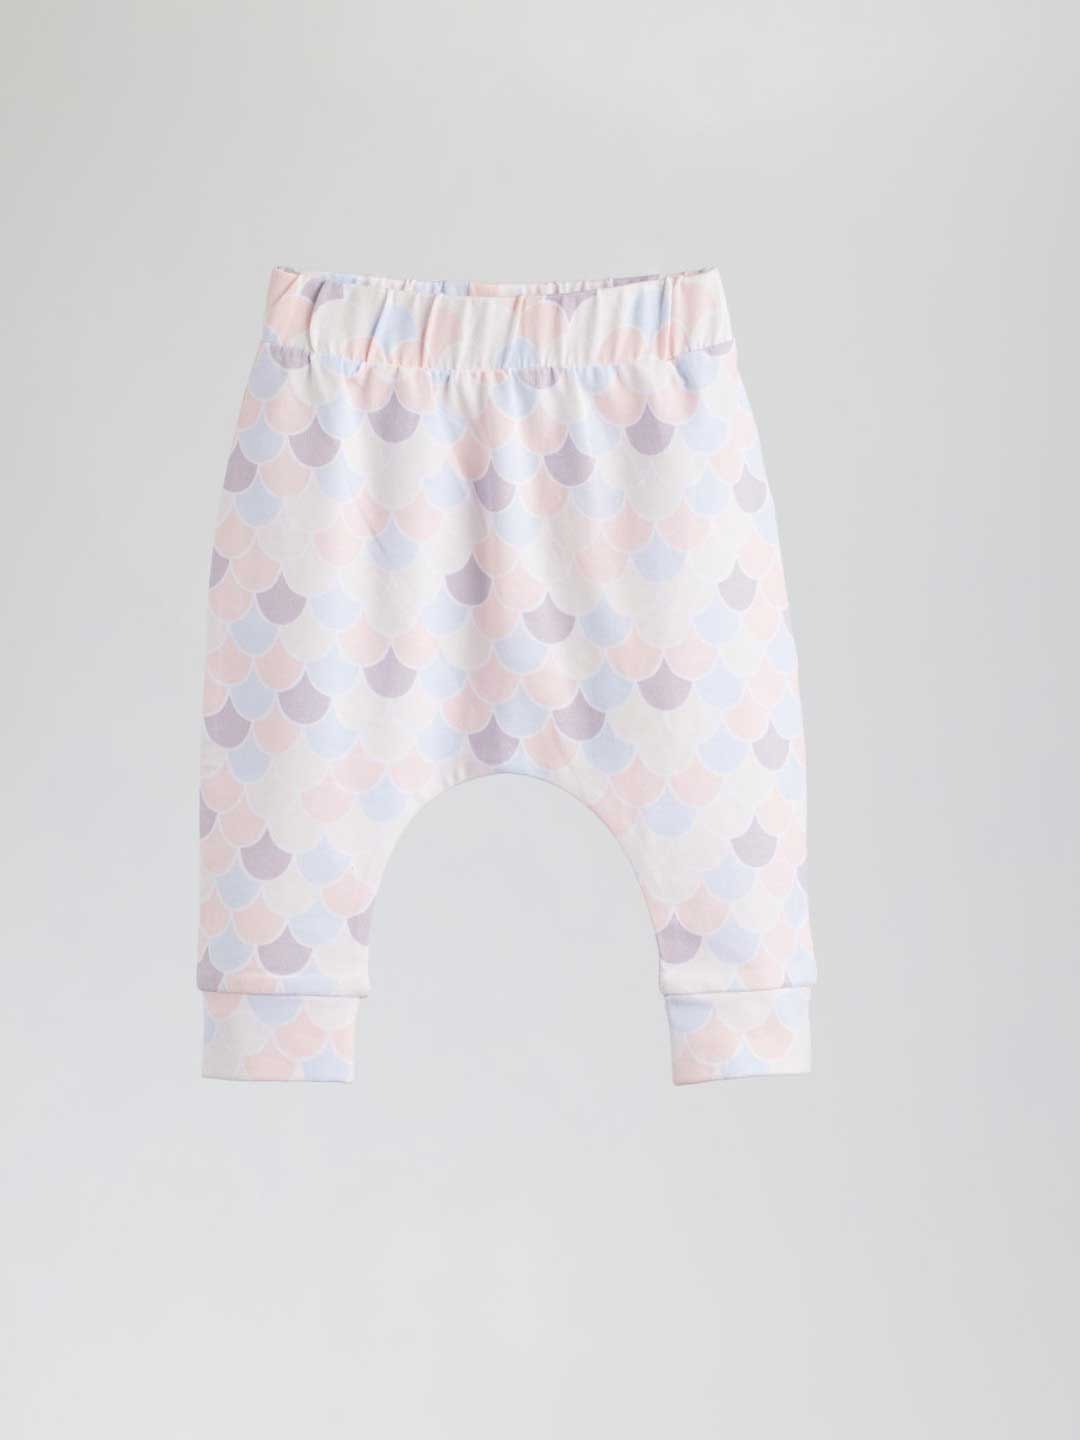 Infant Pants Gold Fish 306 are perfect for your baby’s daily needs. The wide rubber in the waist of our pants will not pinch or press against their delicate belly while they move around and explore.